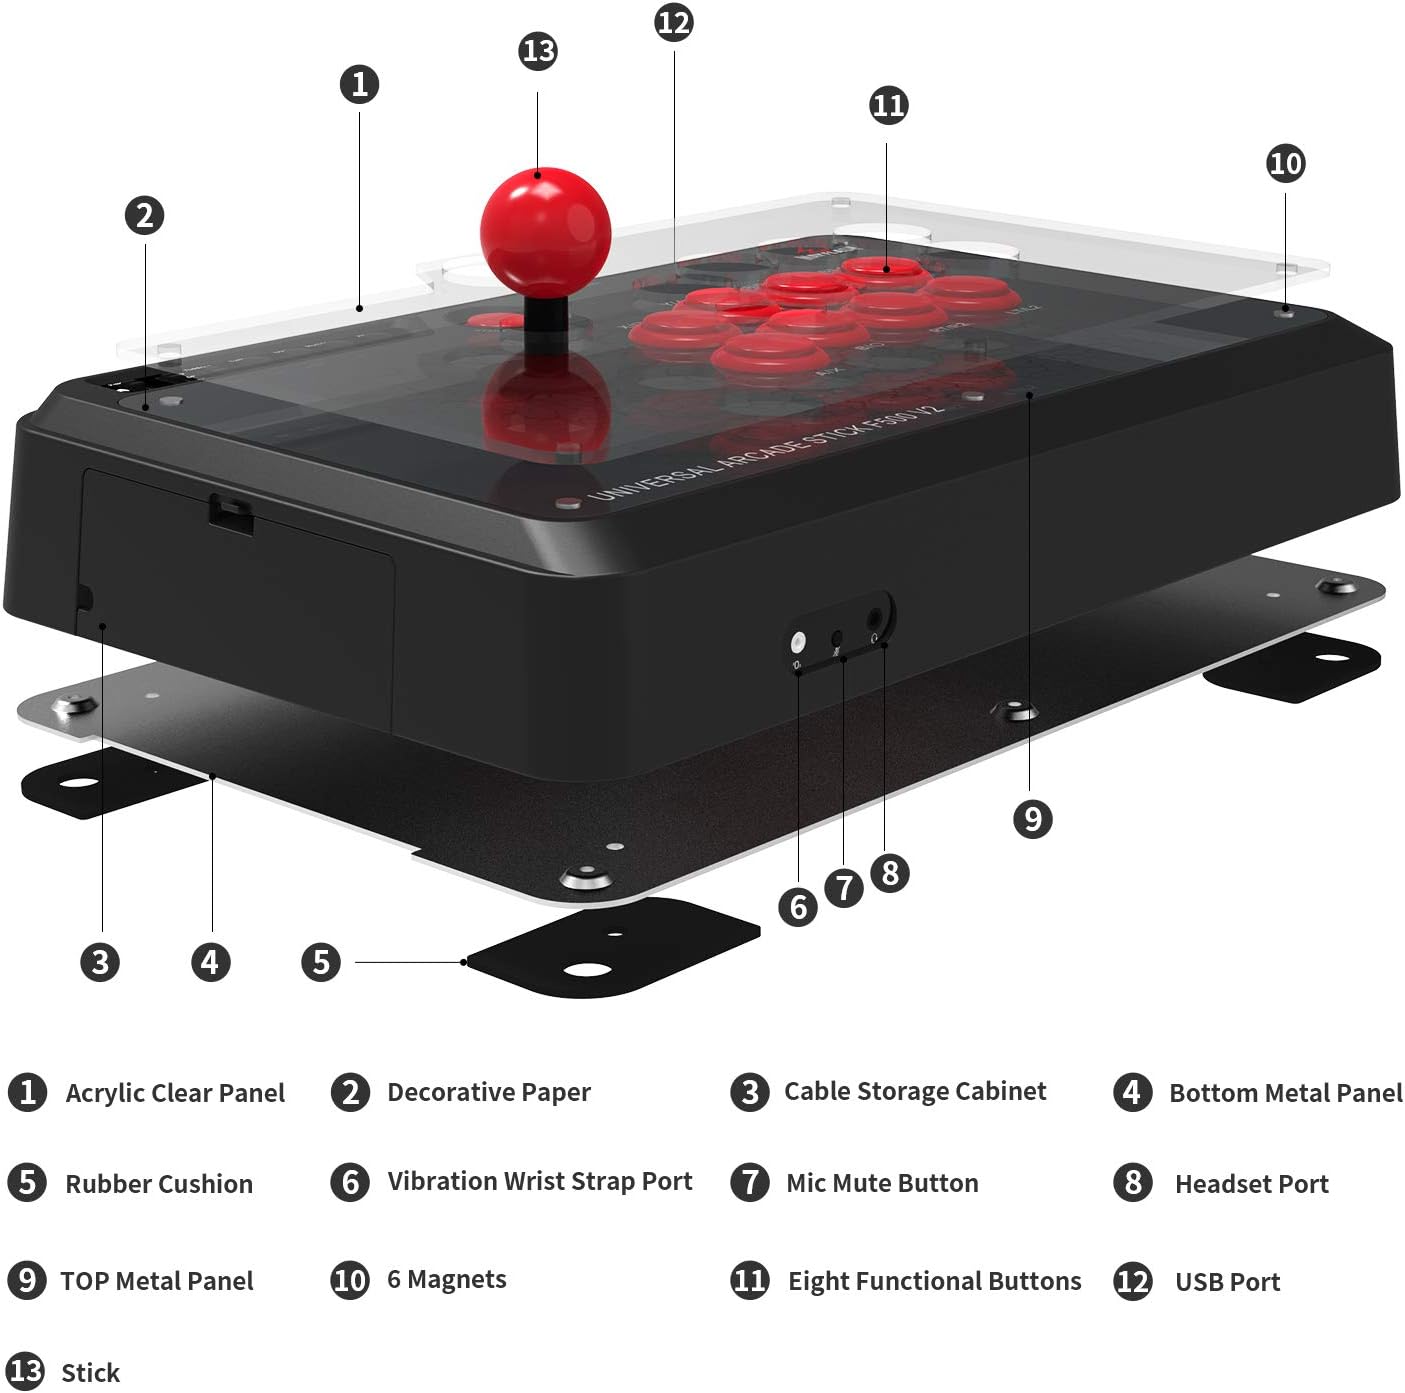 MAYFLASH Universal Arcade Fighting Stick F500 for Switch, Xbox Series X/S, Xbox One, Xbox 360, PS4, PS3, Windows, macOS, Android, Raspberry Pi, Steam Deck, PS Classic, NEOGEO Mini